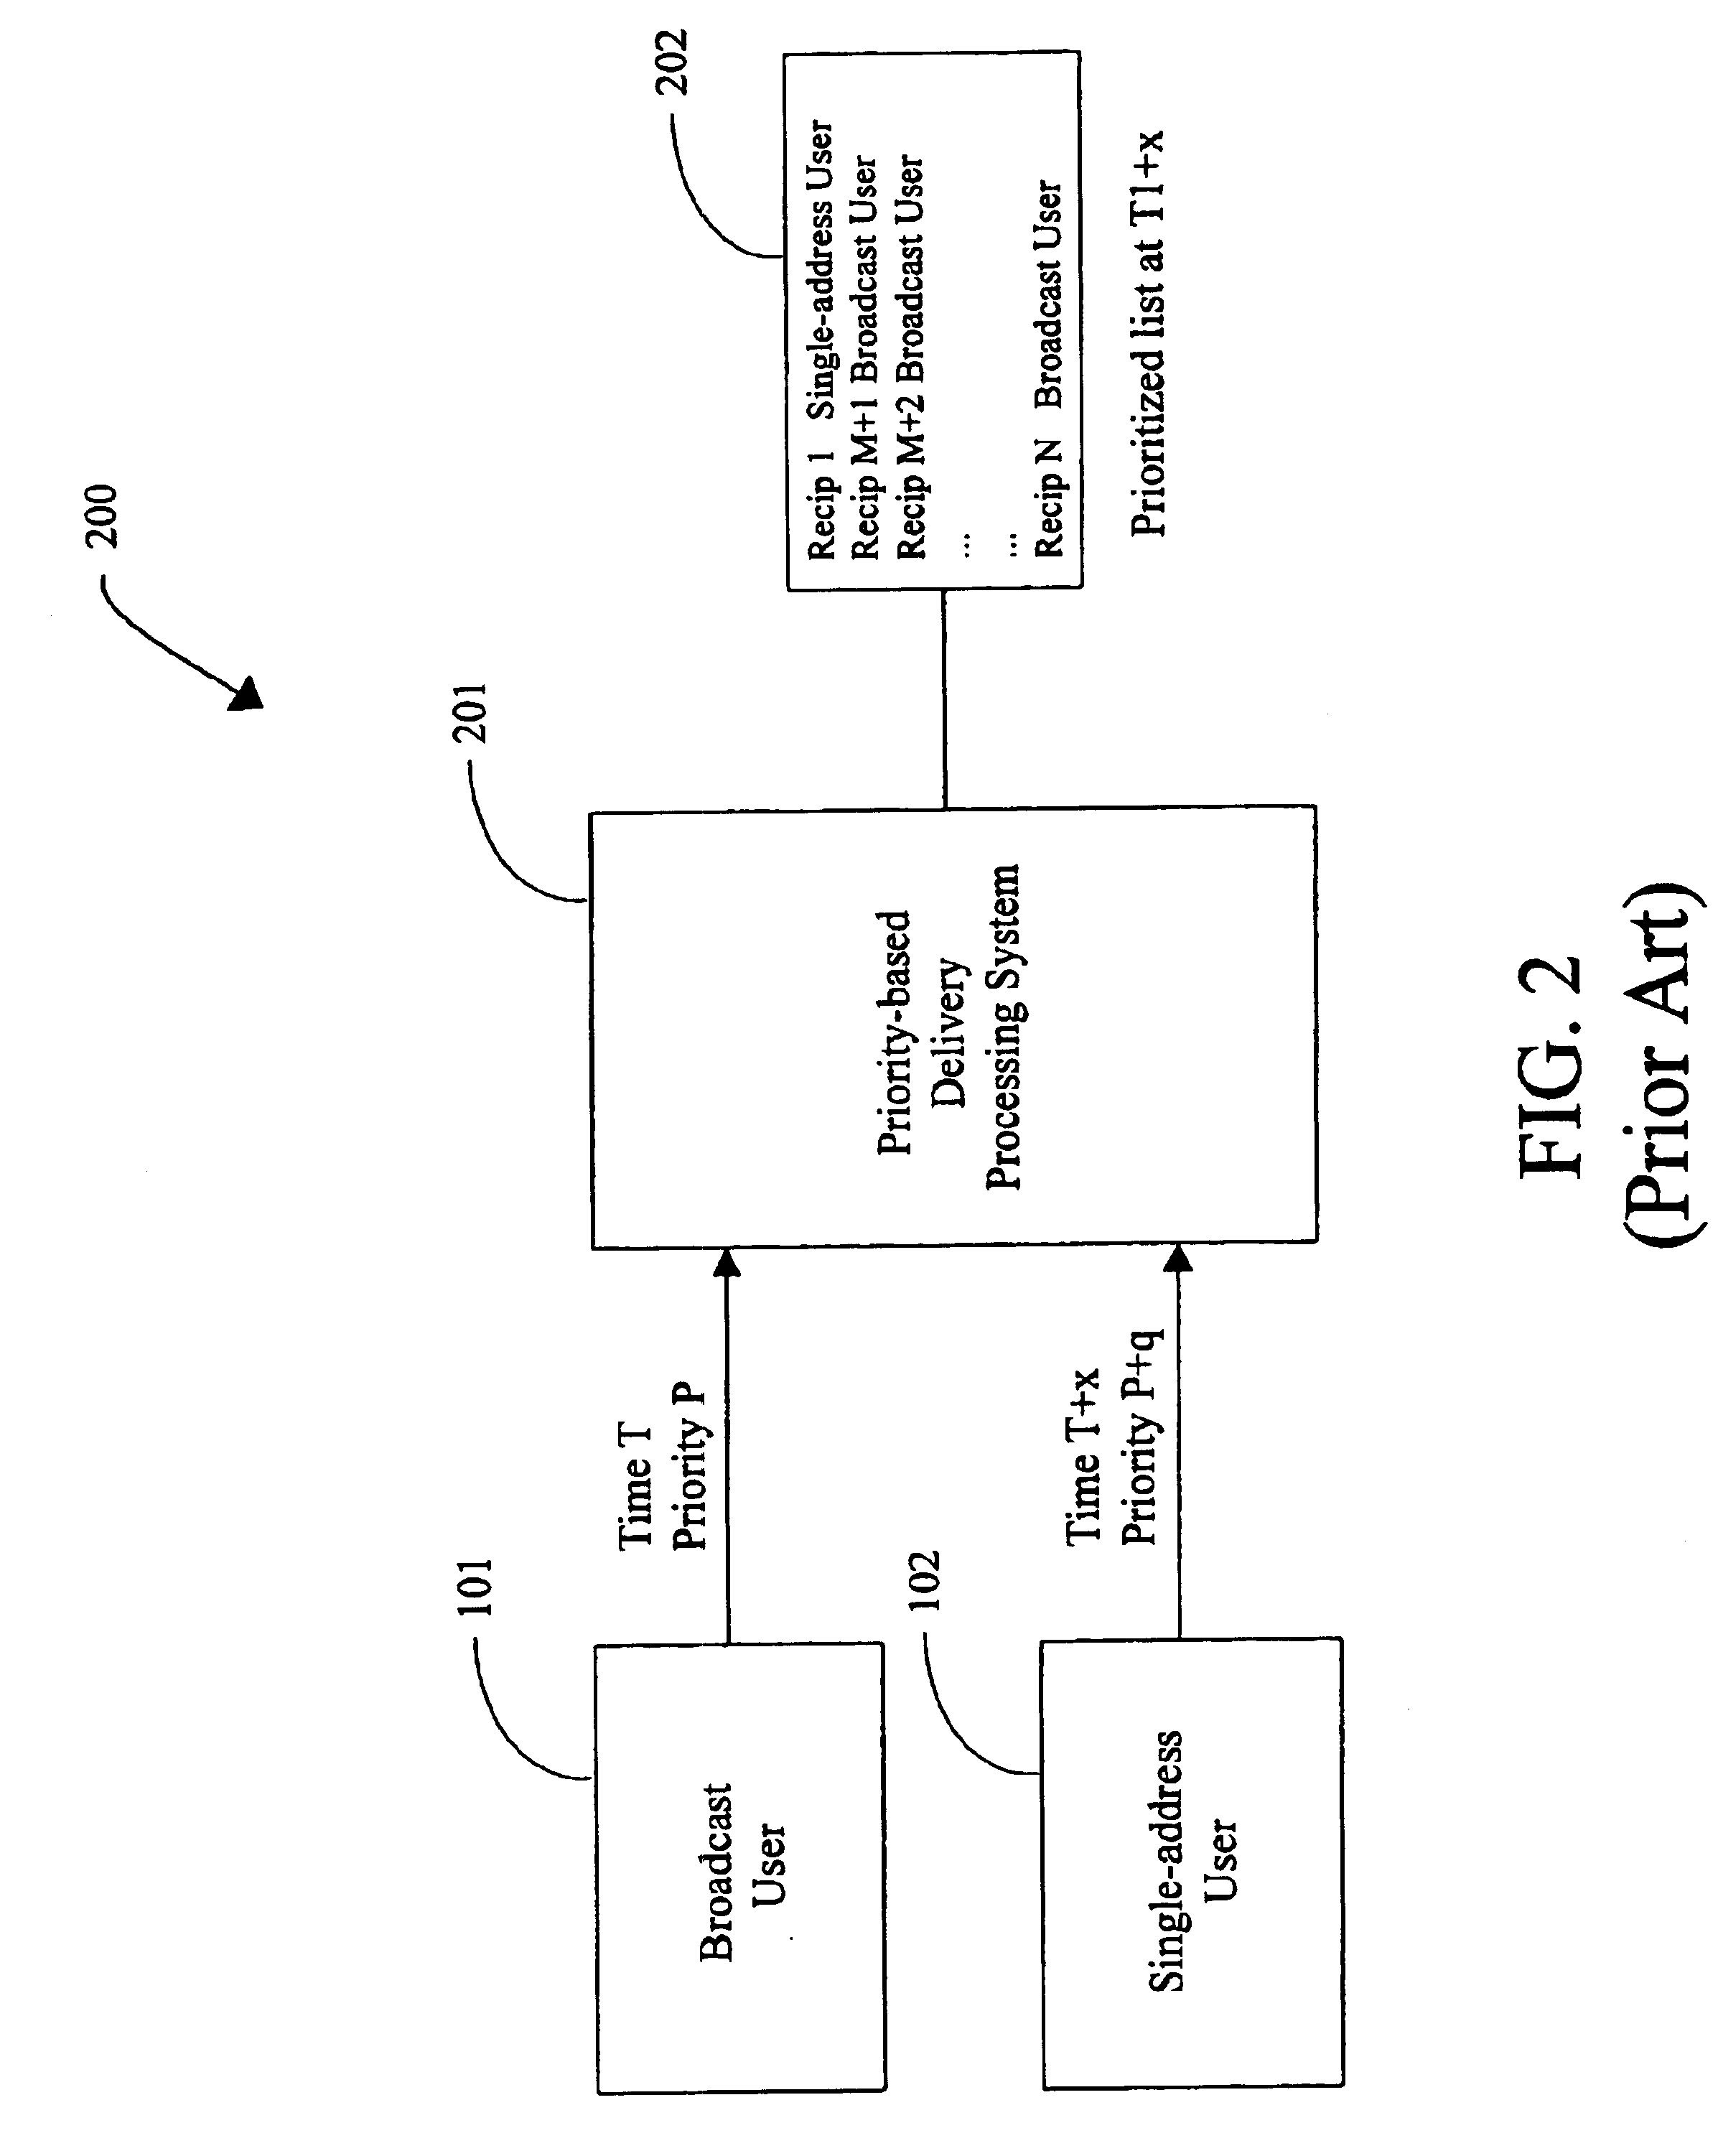 System and method for managing compliance with service level agreements